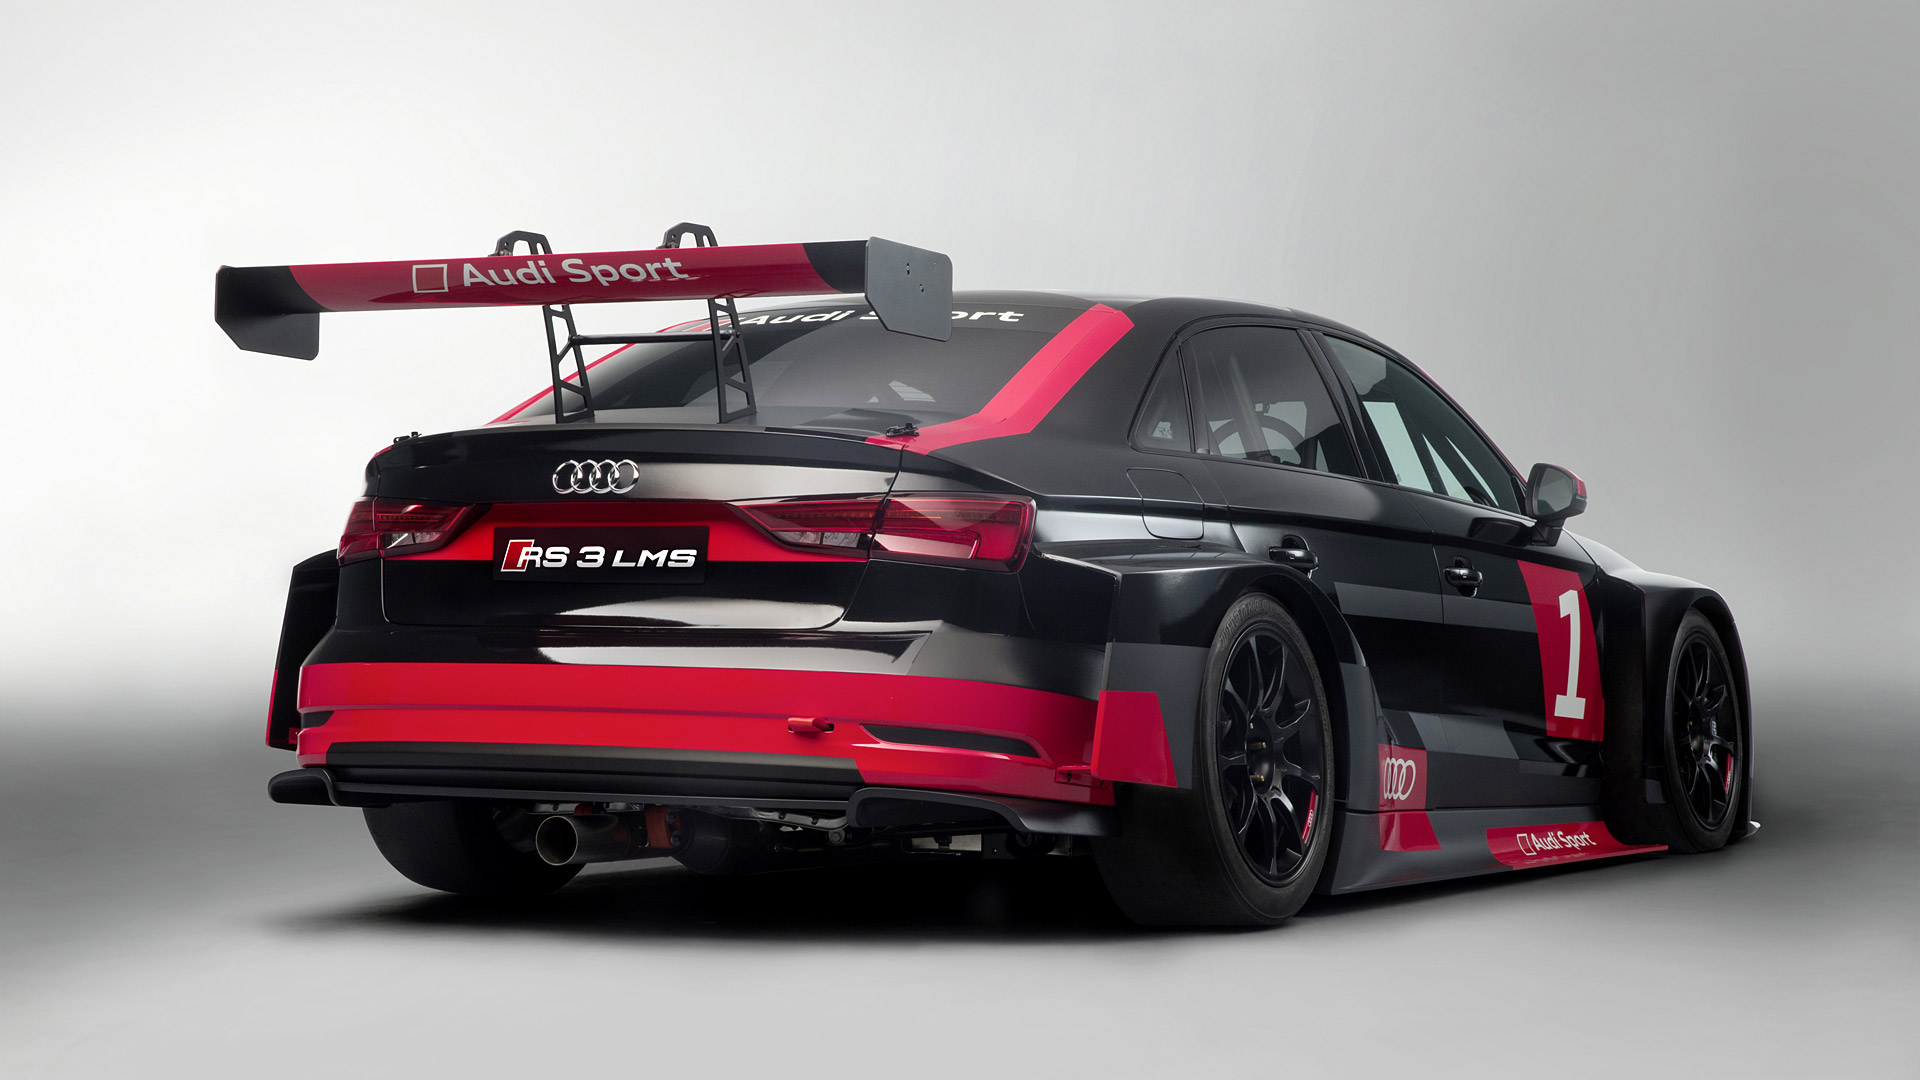 2017 Audi RS3 LMS Wallpapers HD Images   WSupercars 1920x1080